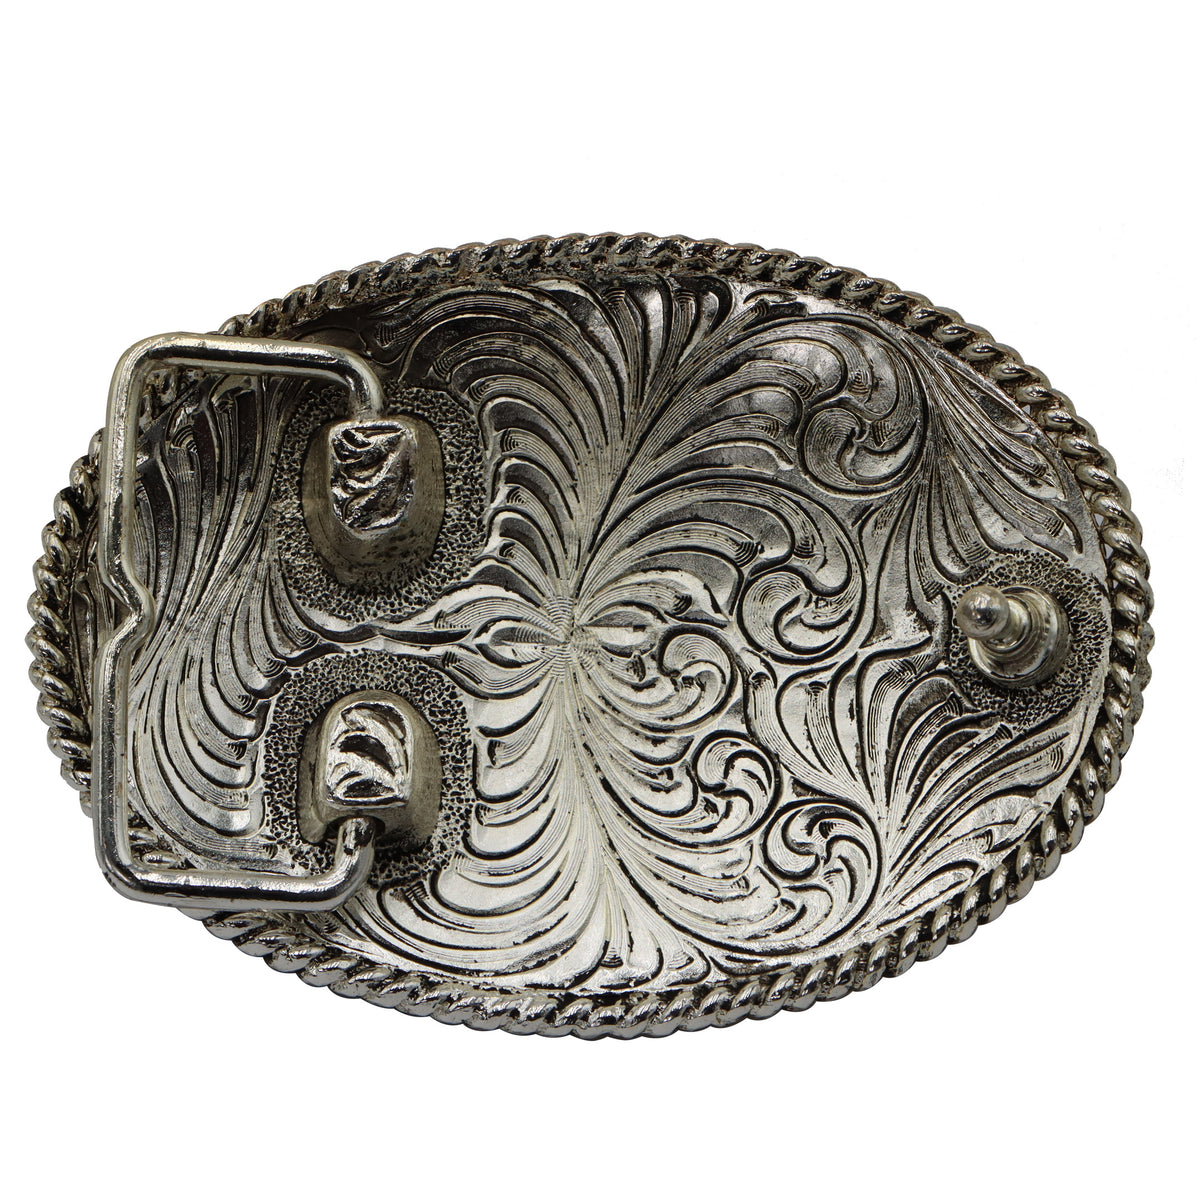 Initial “L” Buckle